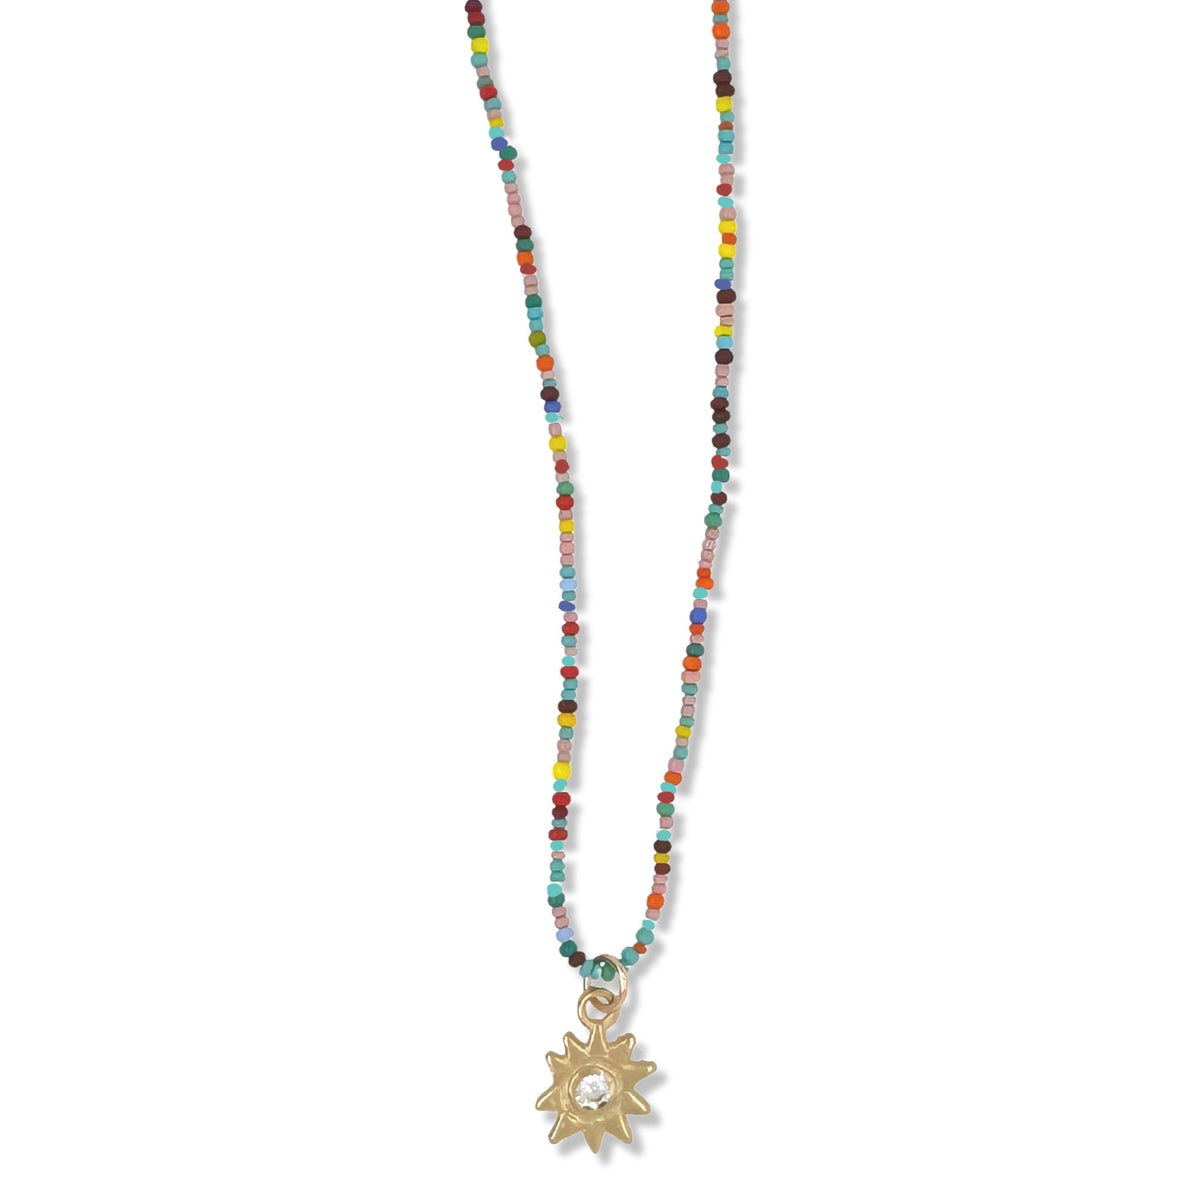 Night Star Necklace in gold on multi color beads by Keely SMith Jewelry Designs